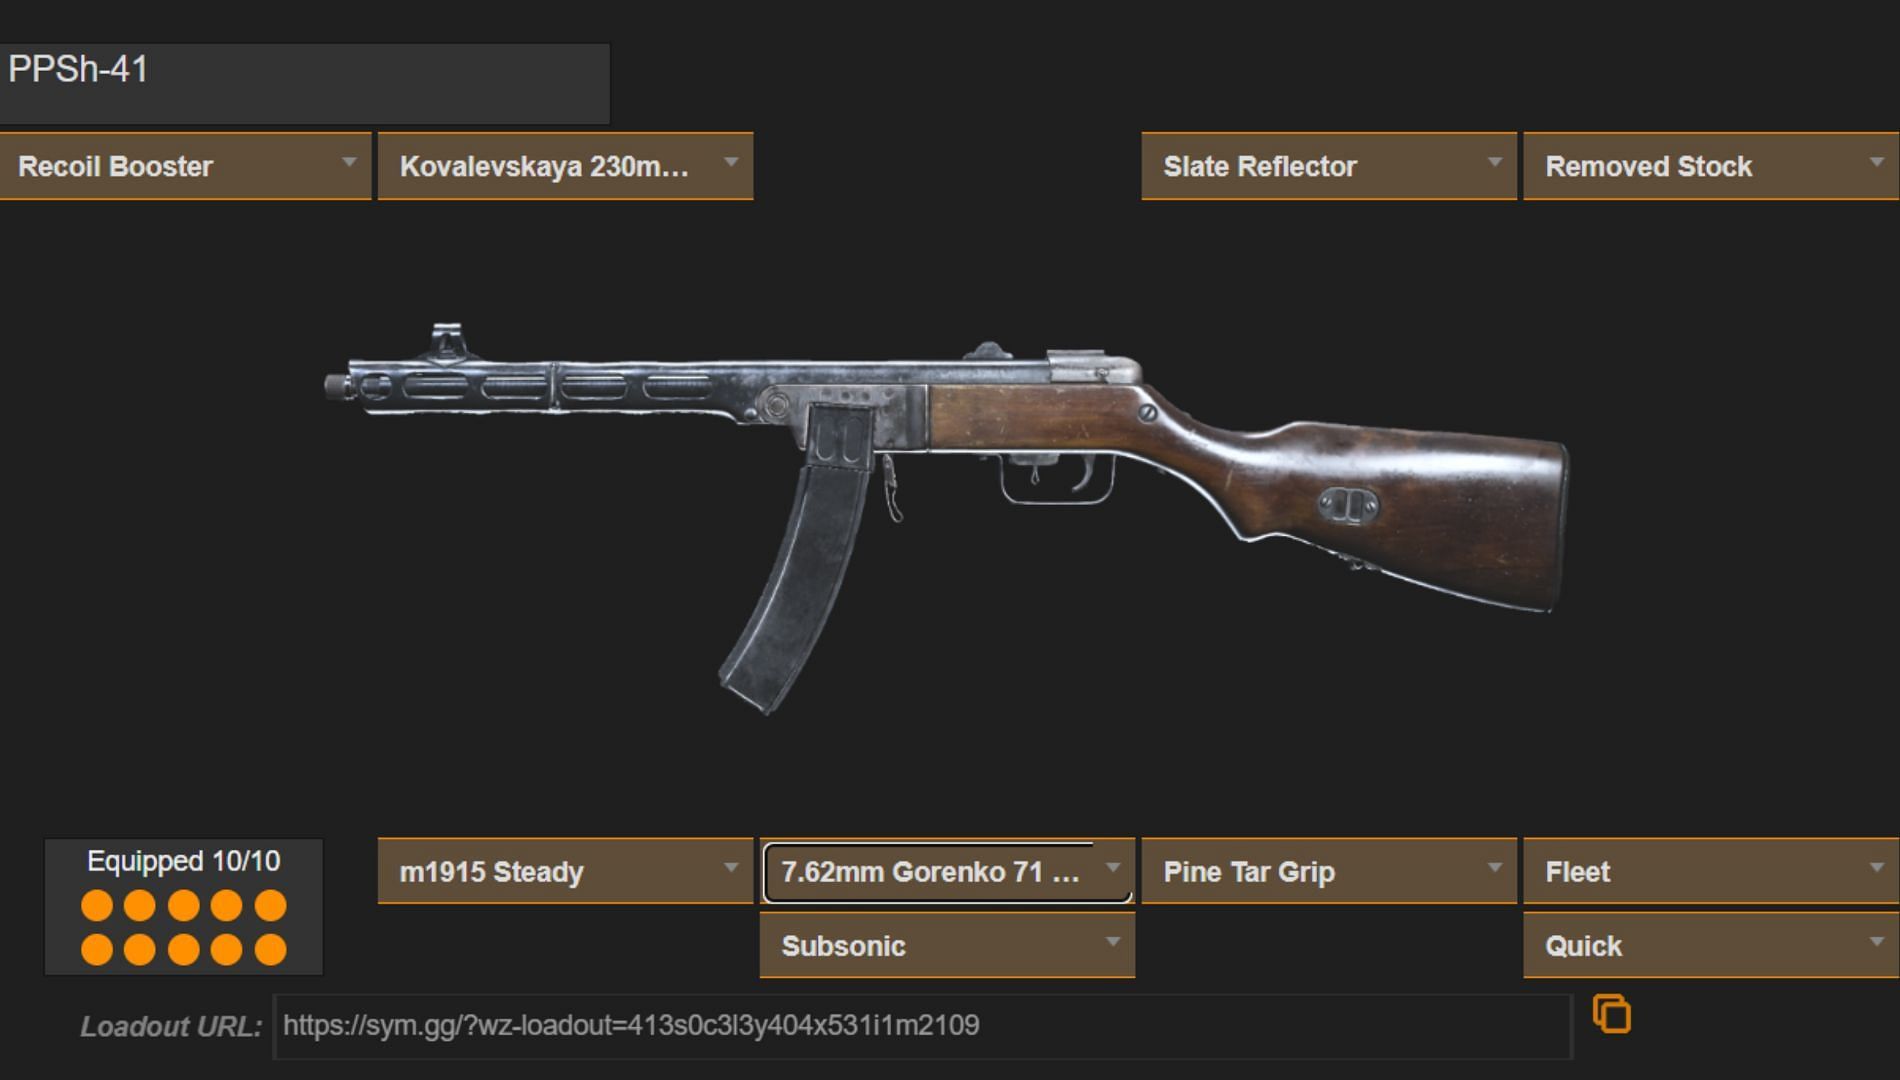 Call of Duty: Warzone&#039;s PPSh-41 (Image via sym.gg)